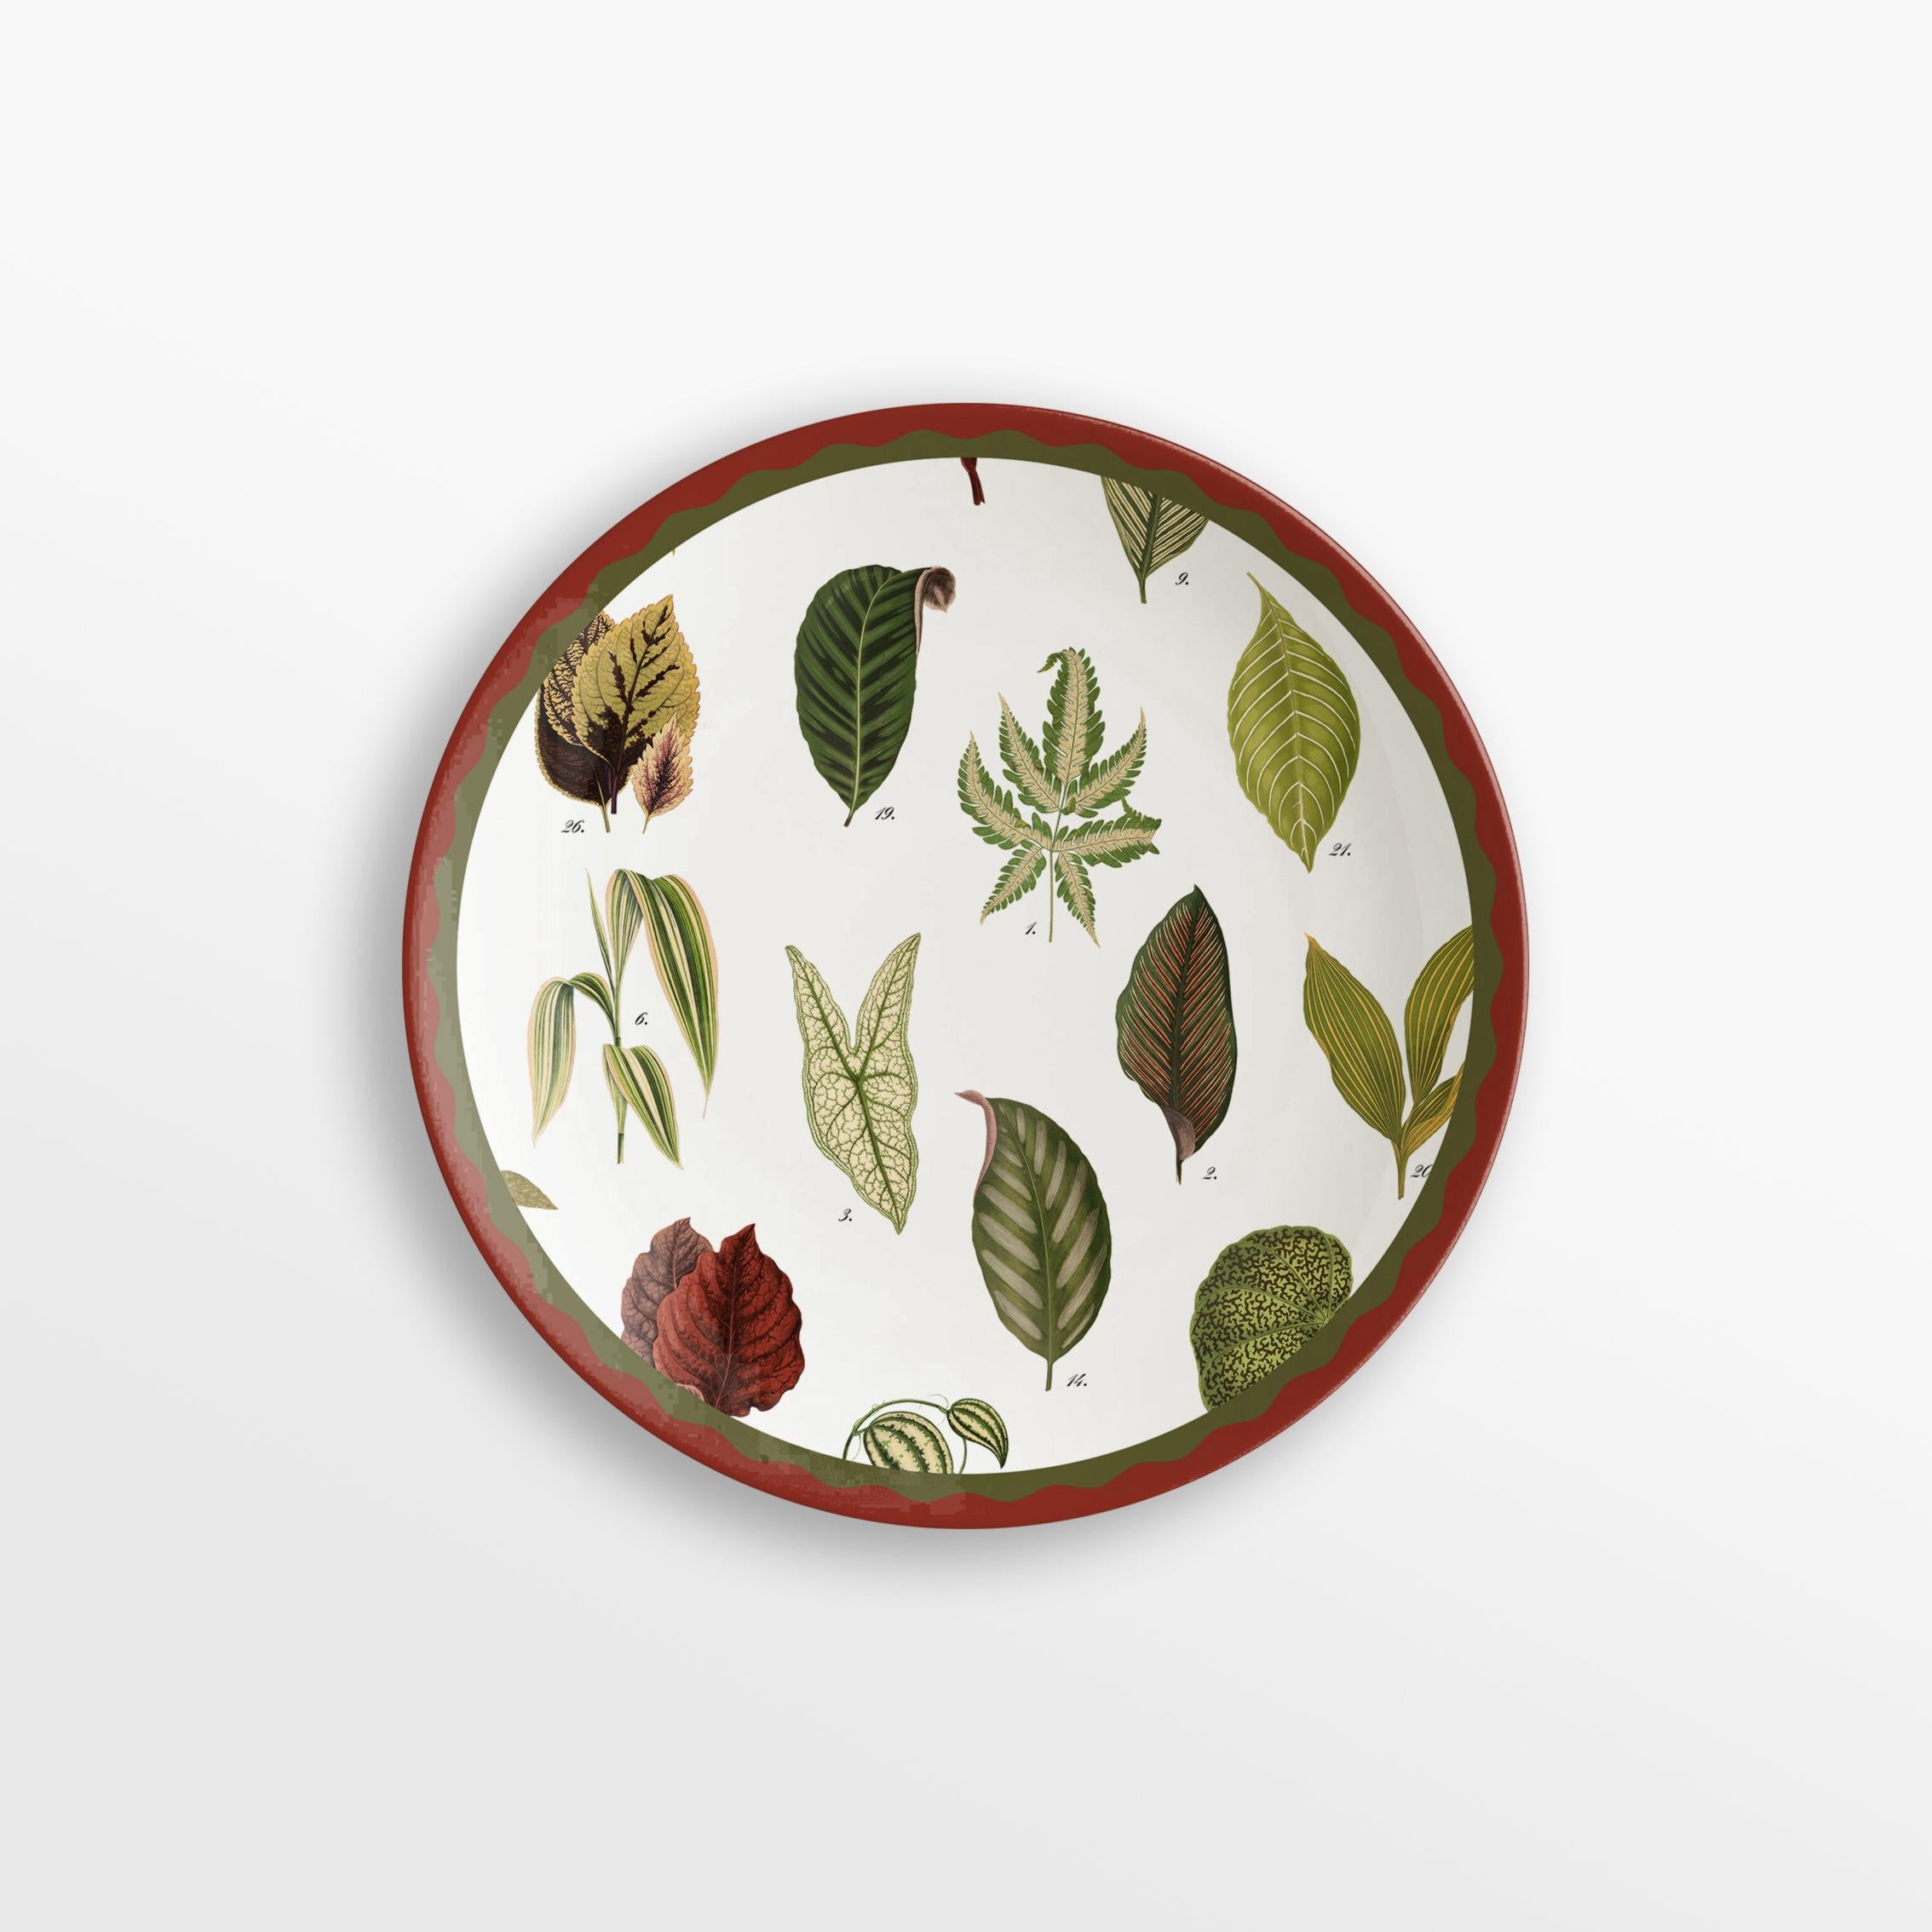 Cabinet de Curiosités, Six Contemporary Decorated Porcelain Dessert Plates In New Condition For Sale In Milano, Lombardia